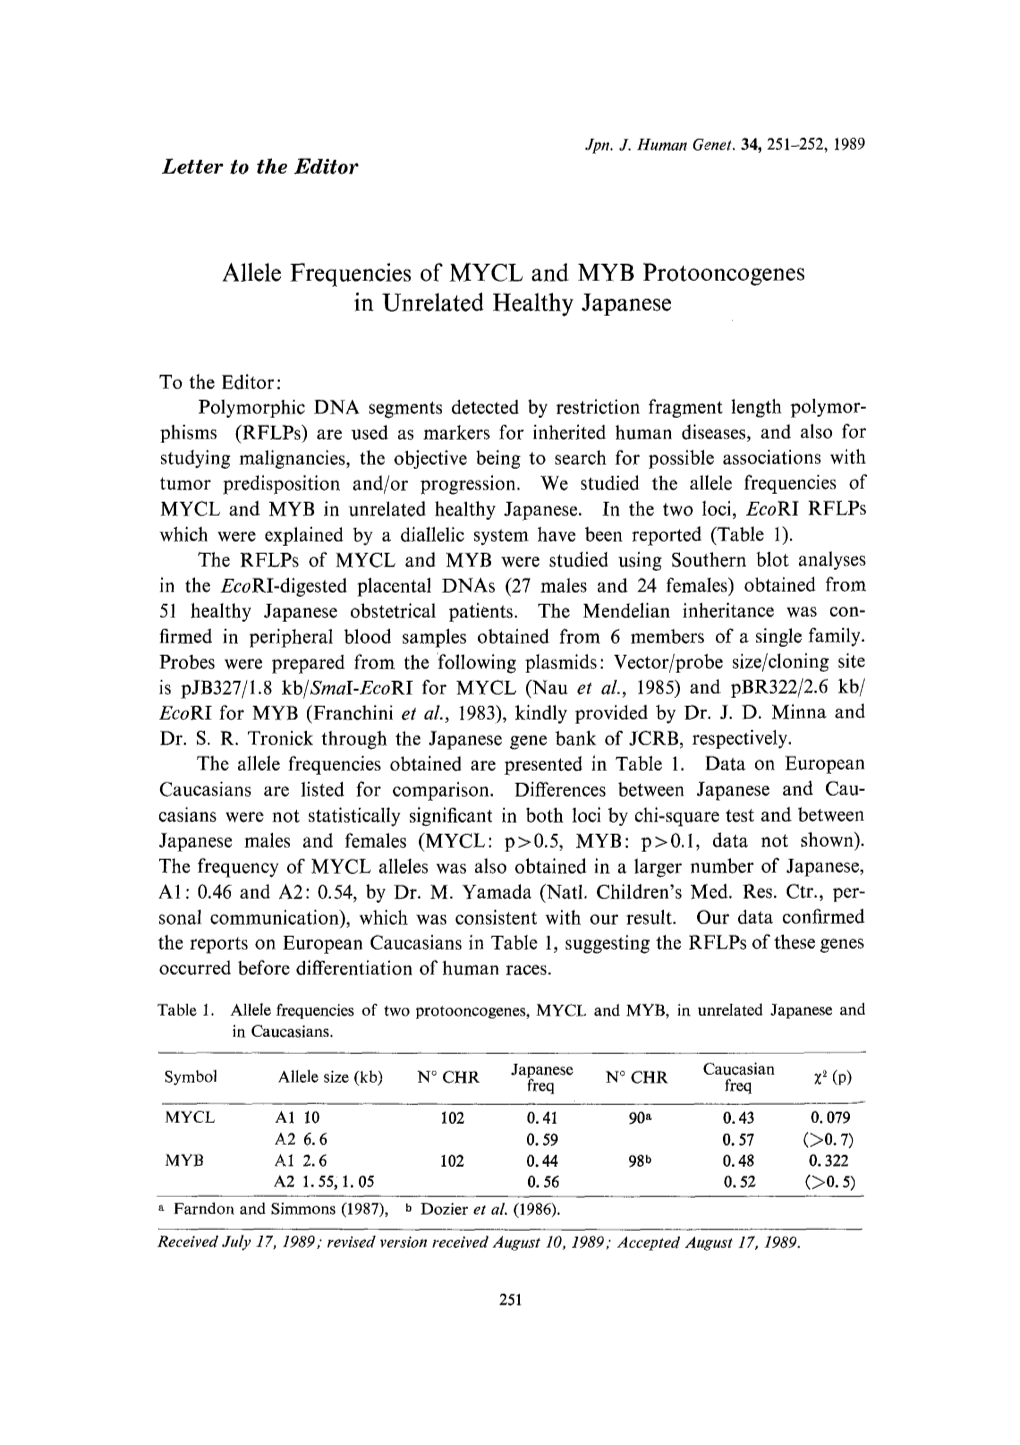 Allele Frequencies of MYCL and MYB Protooncogenes in Unrelated Healthy Japanese